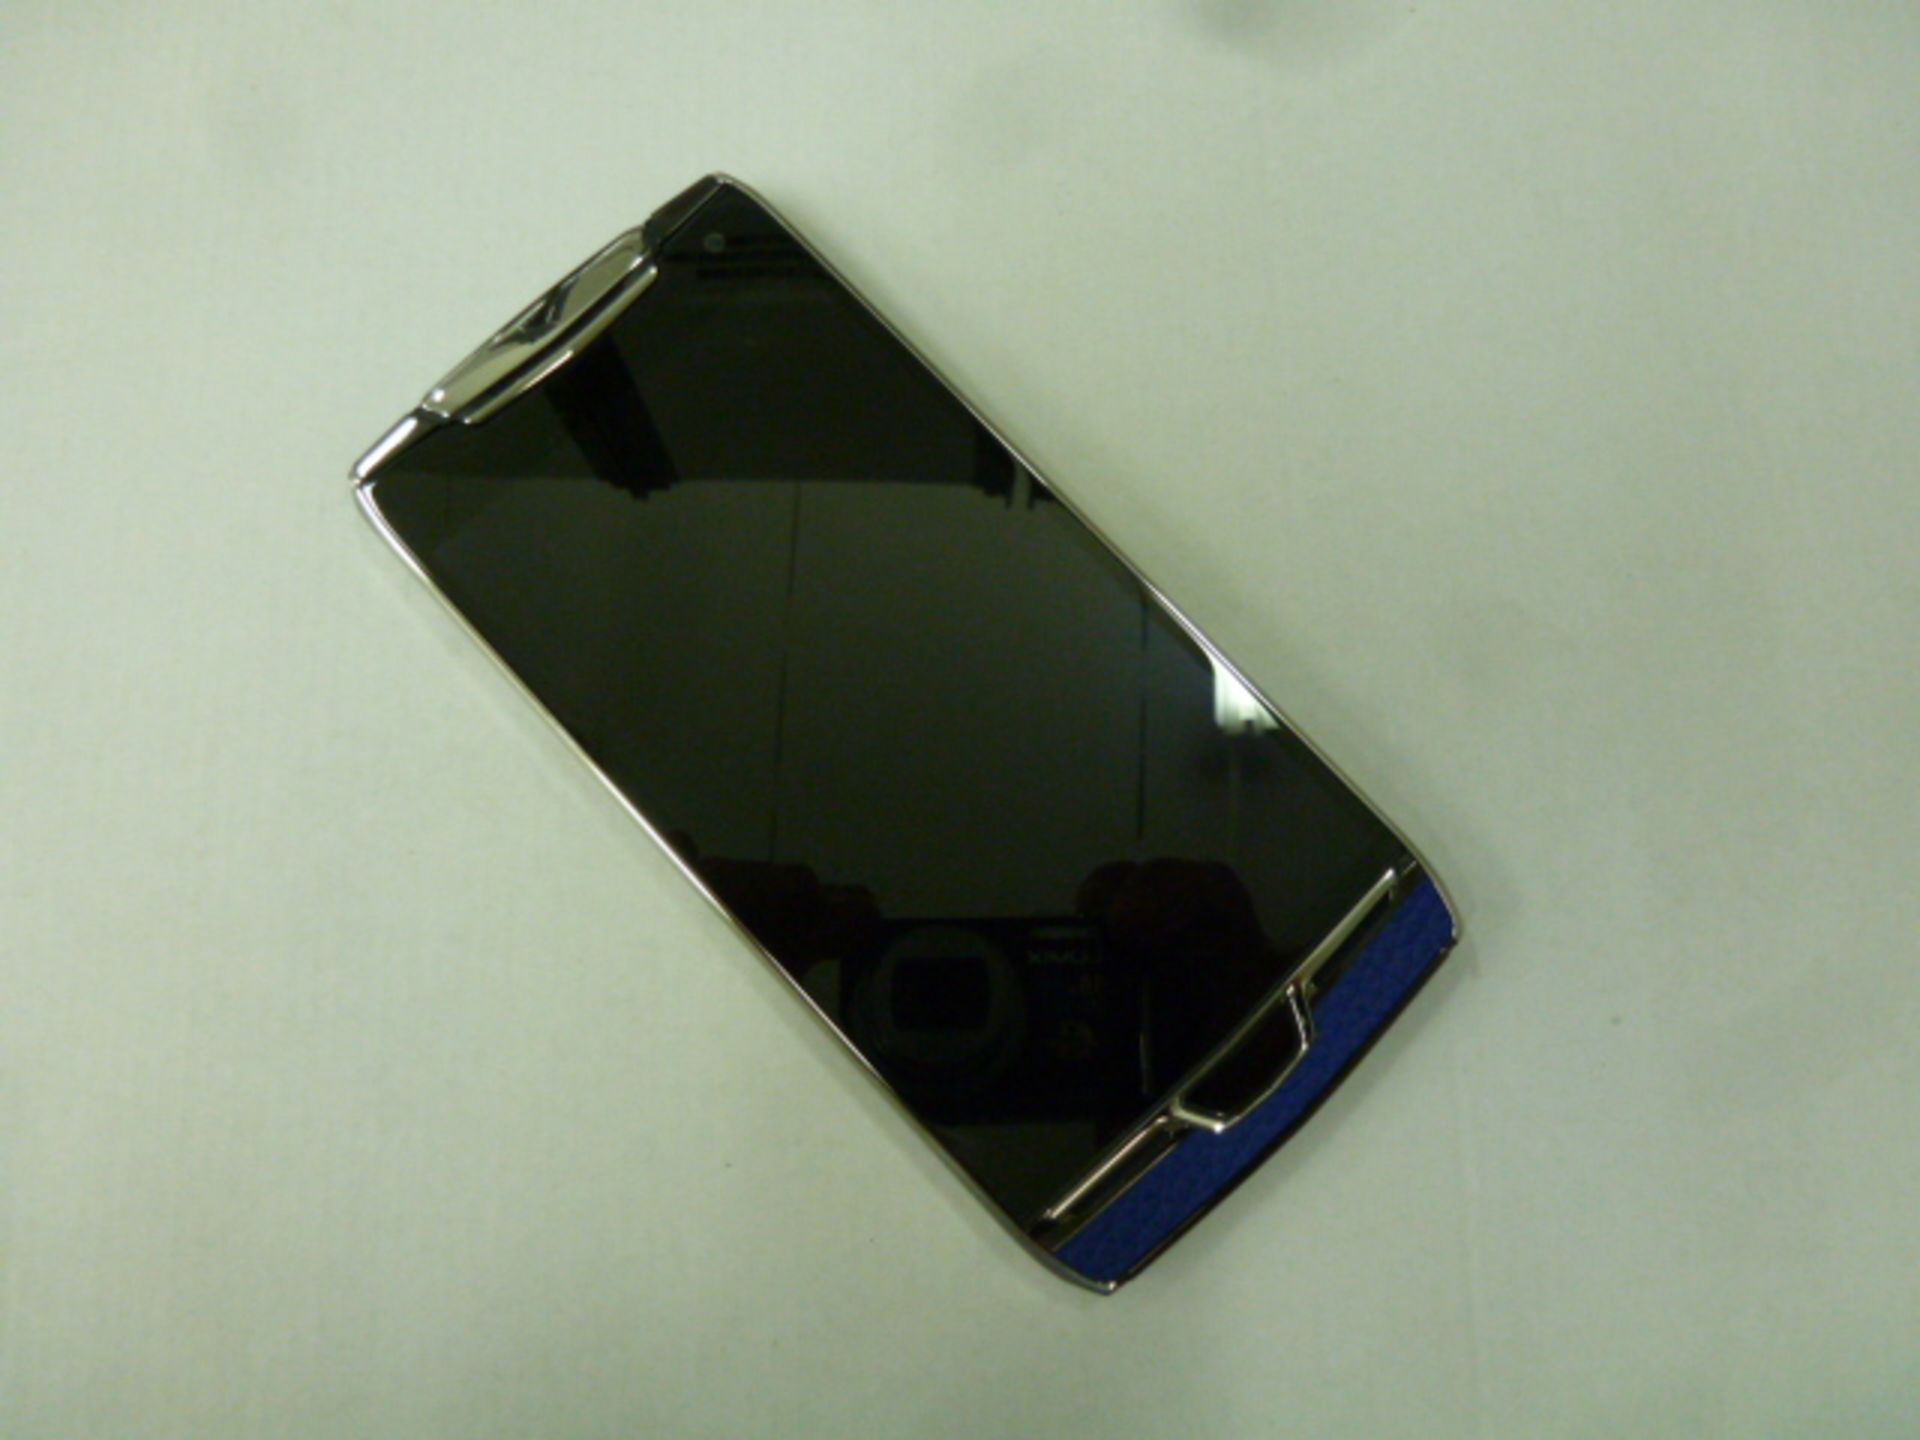 Vertu Tron Touch Phone, Blue Leather back. Unused Demonstrator, s/n 8-001222. Comes in Sales Box